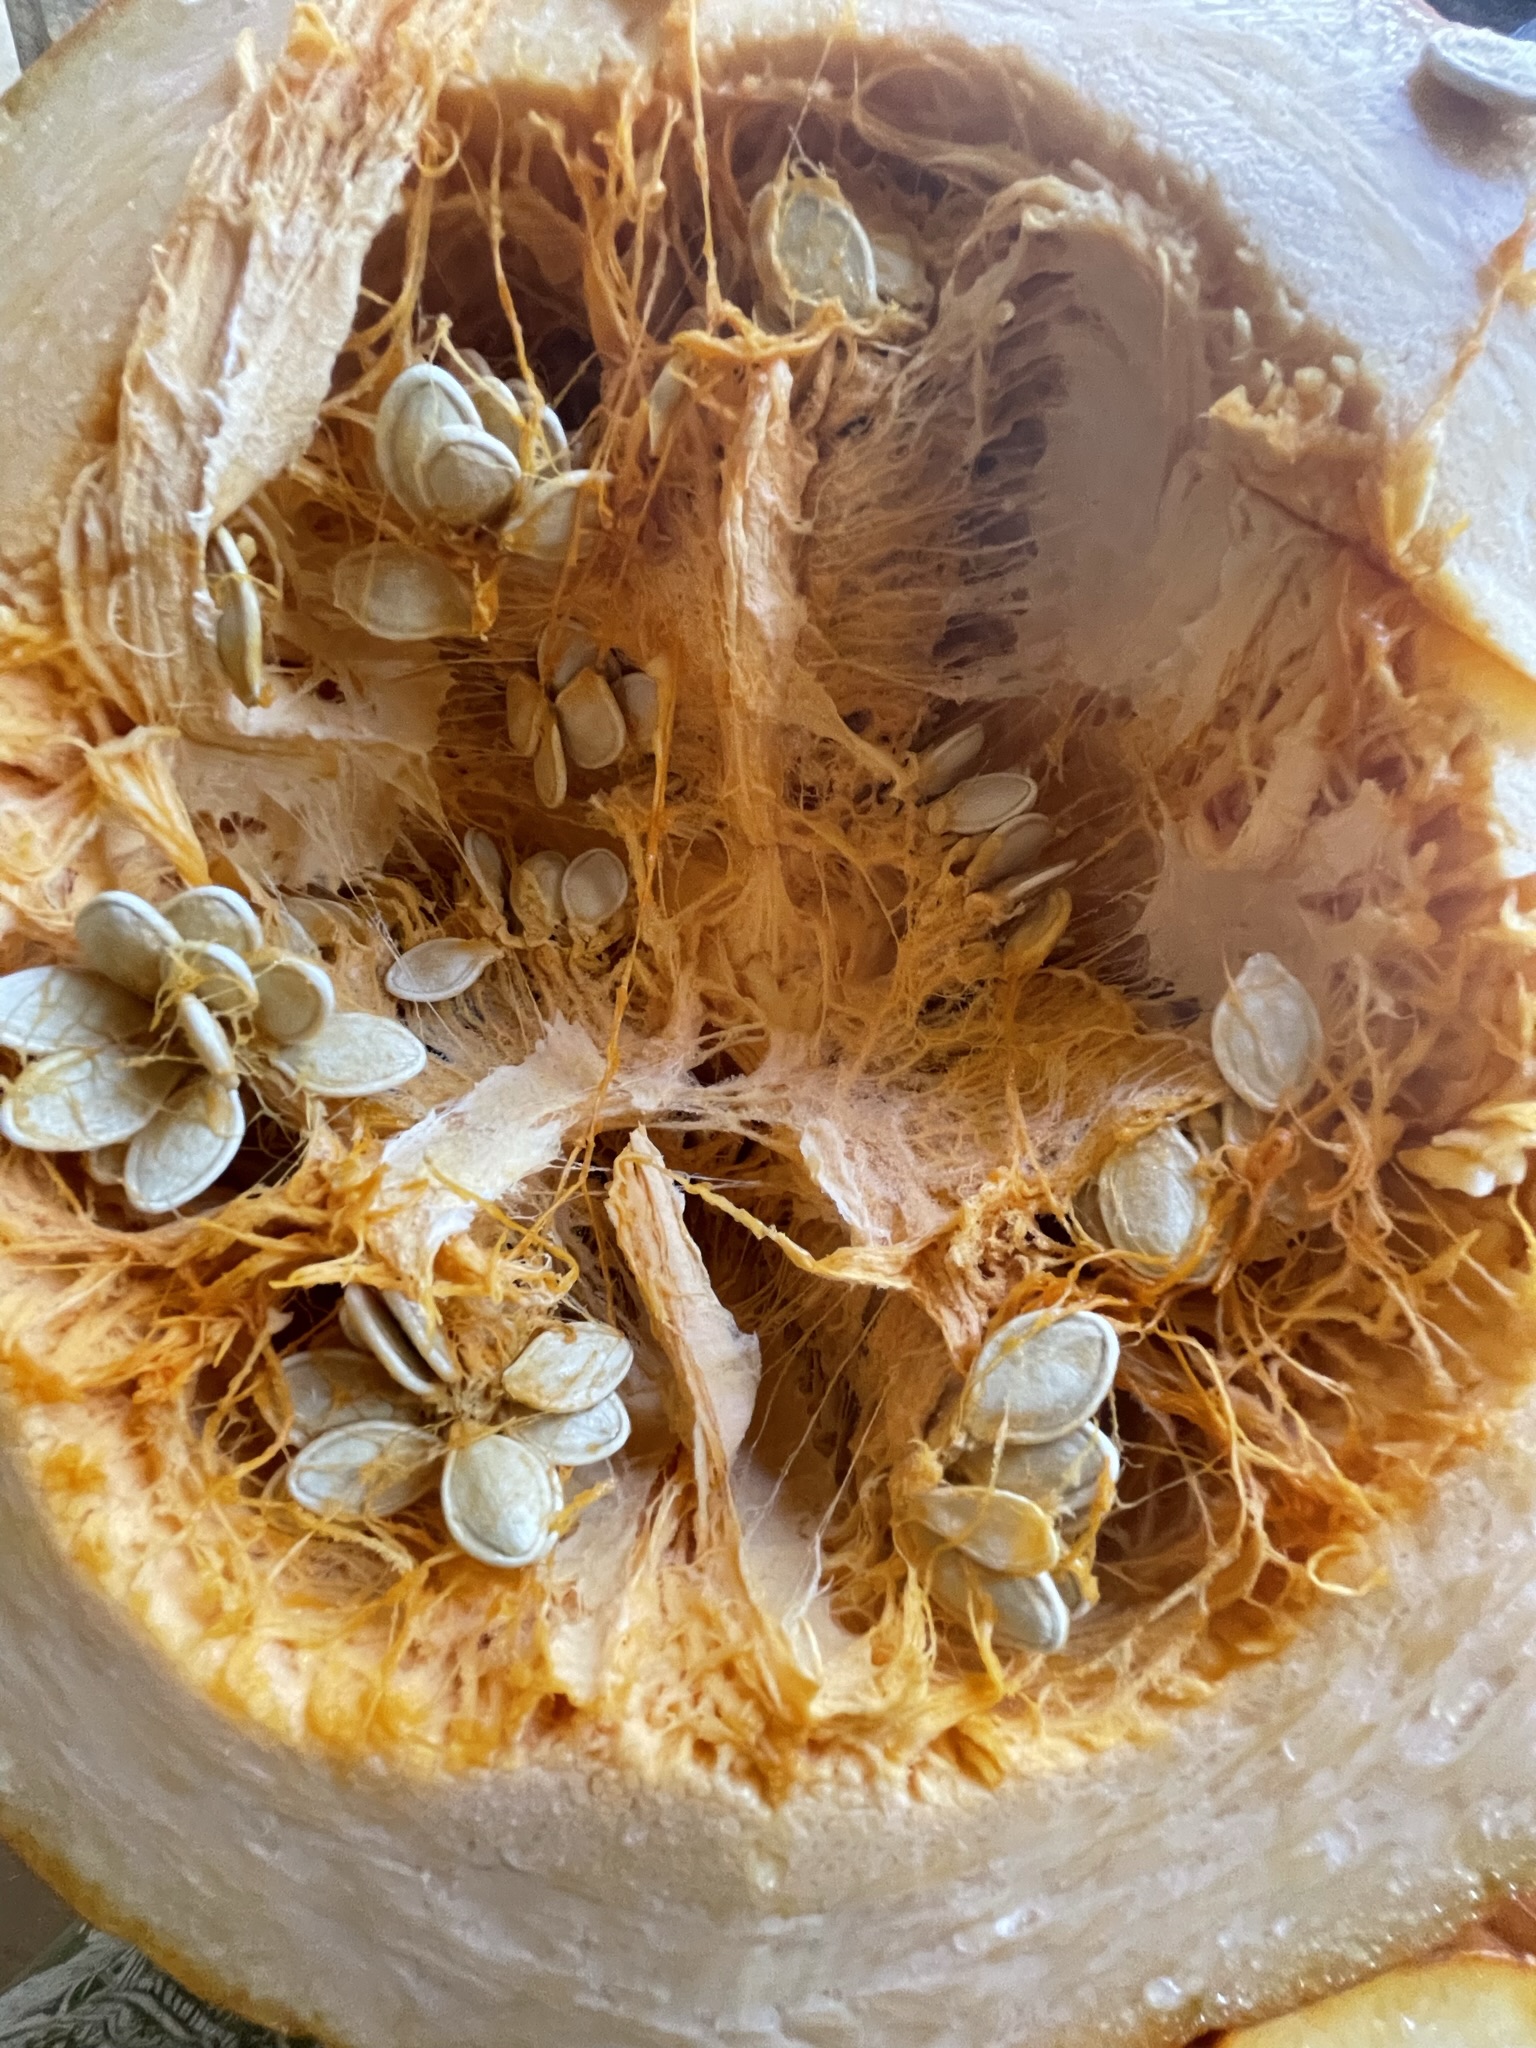 Seeds attached to the pumpkin.